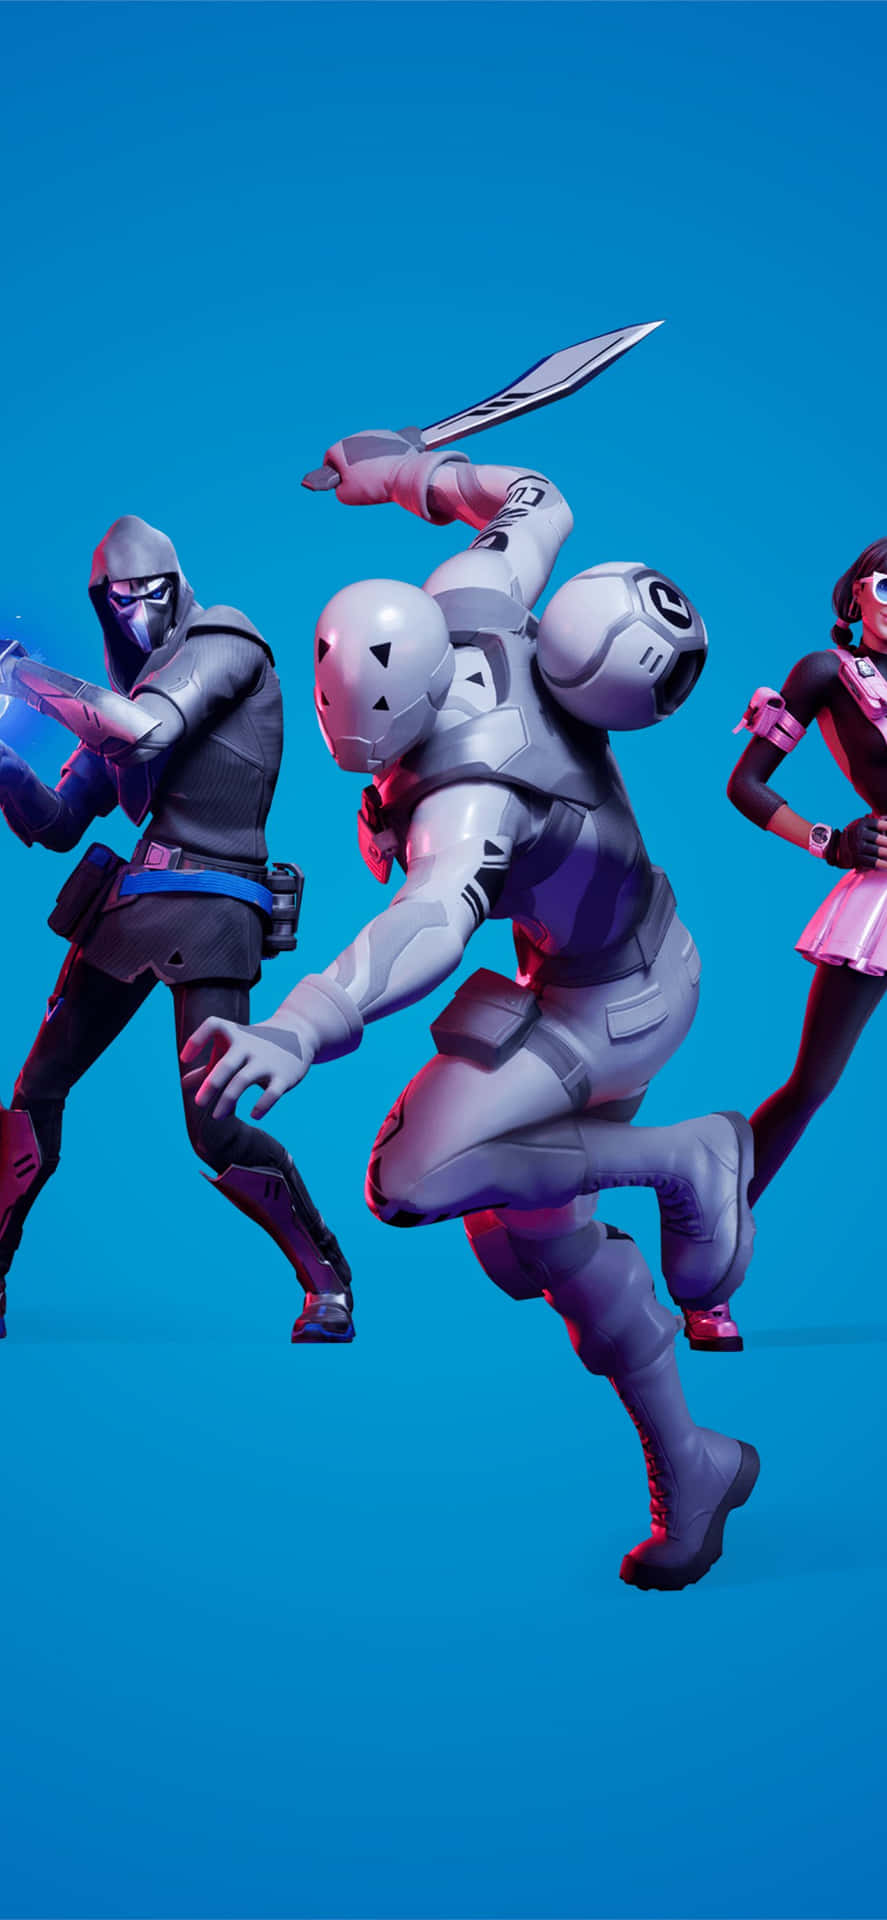 Join your team and fight, with the new Season 4 Chapter 2 of Fortnite Wallpaper